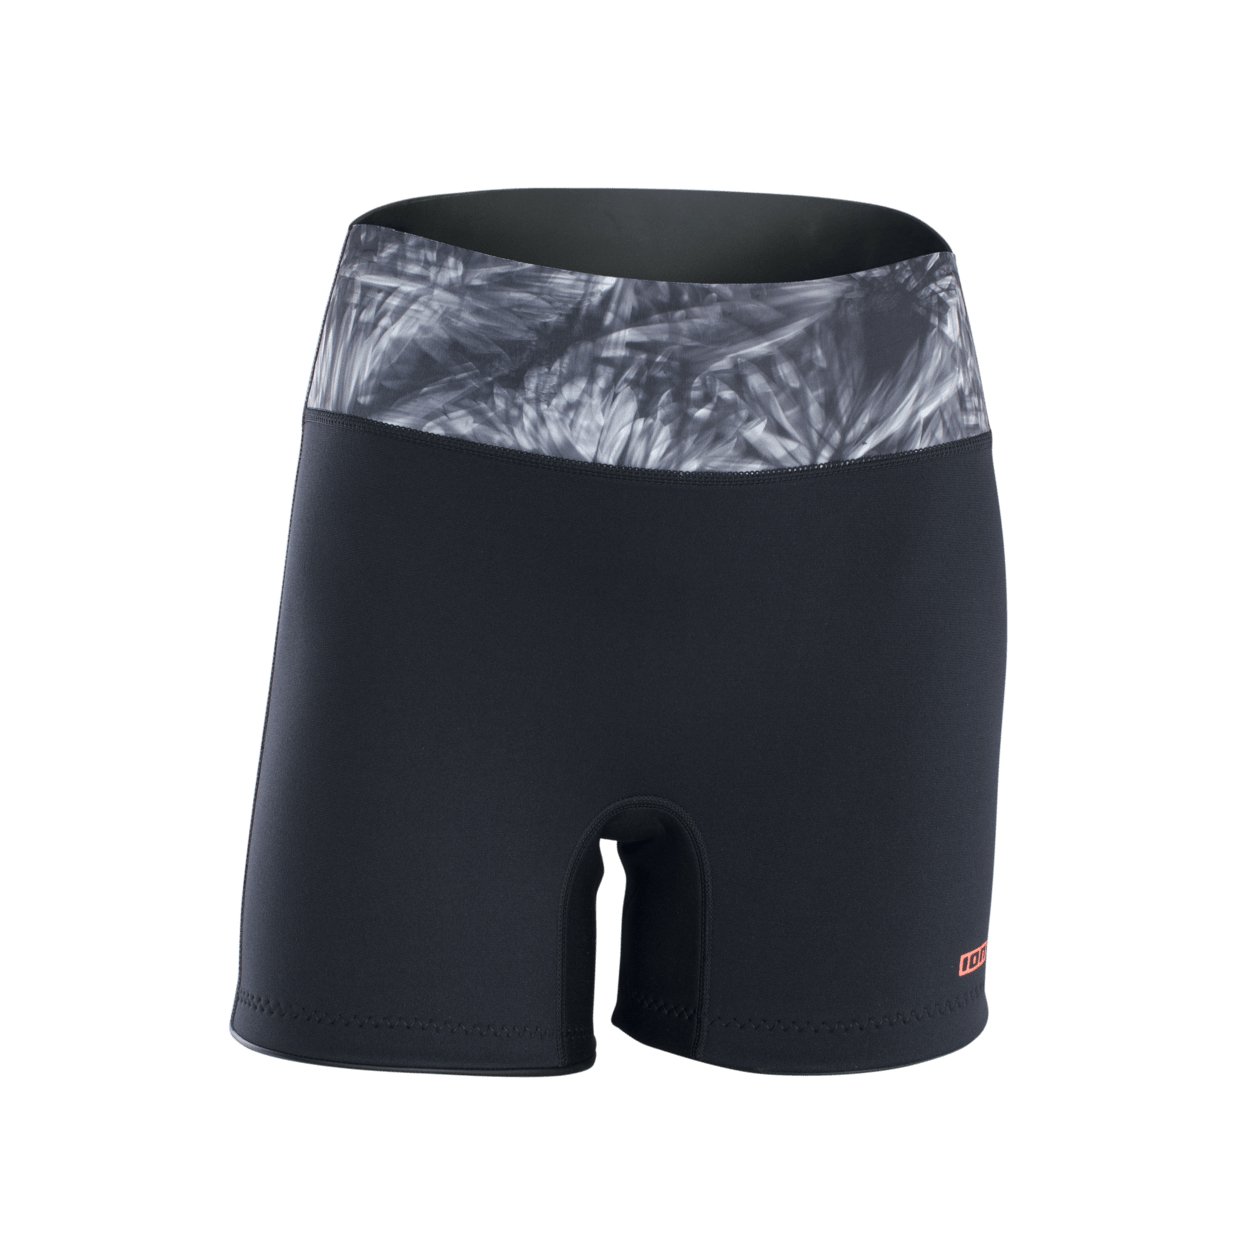 ION Neo Shorts 2023 - Worthing Watersports - 9010583118406 - Tops - ION Water